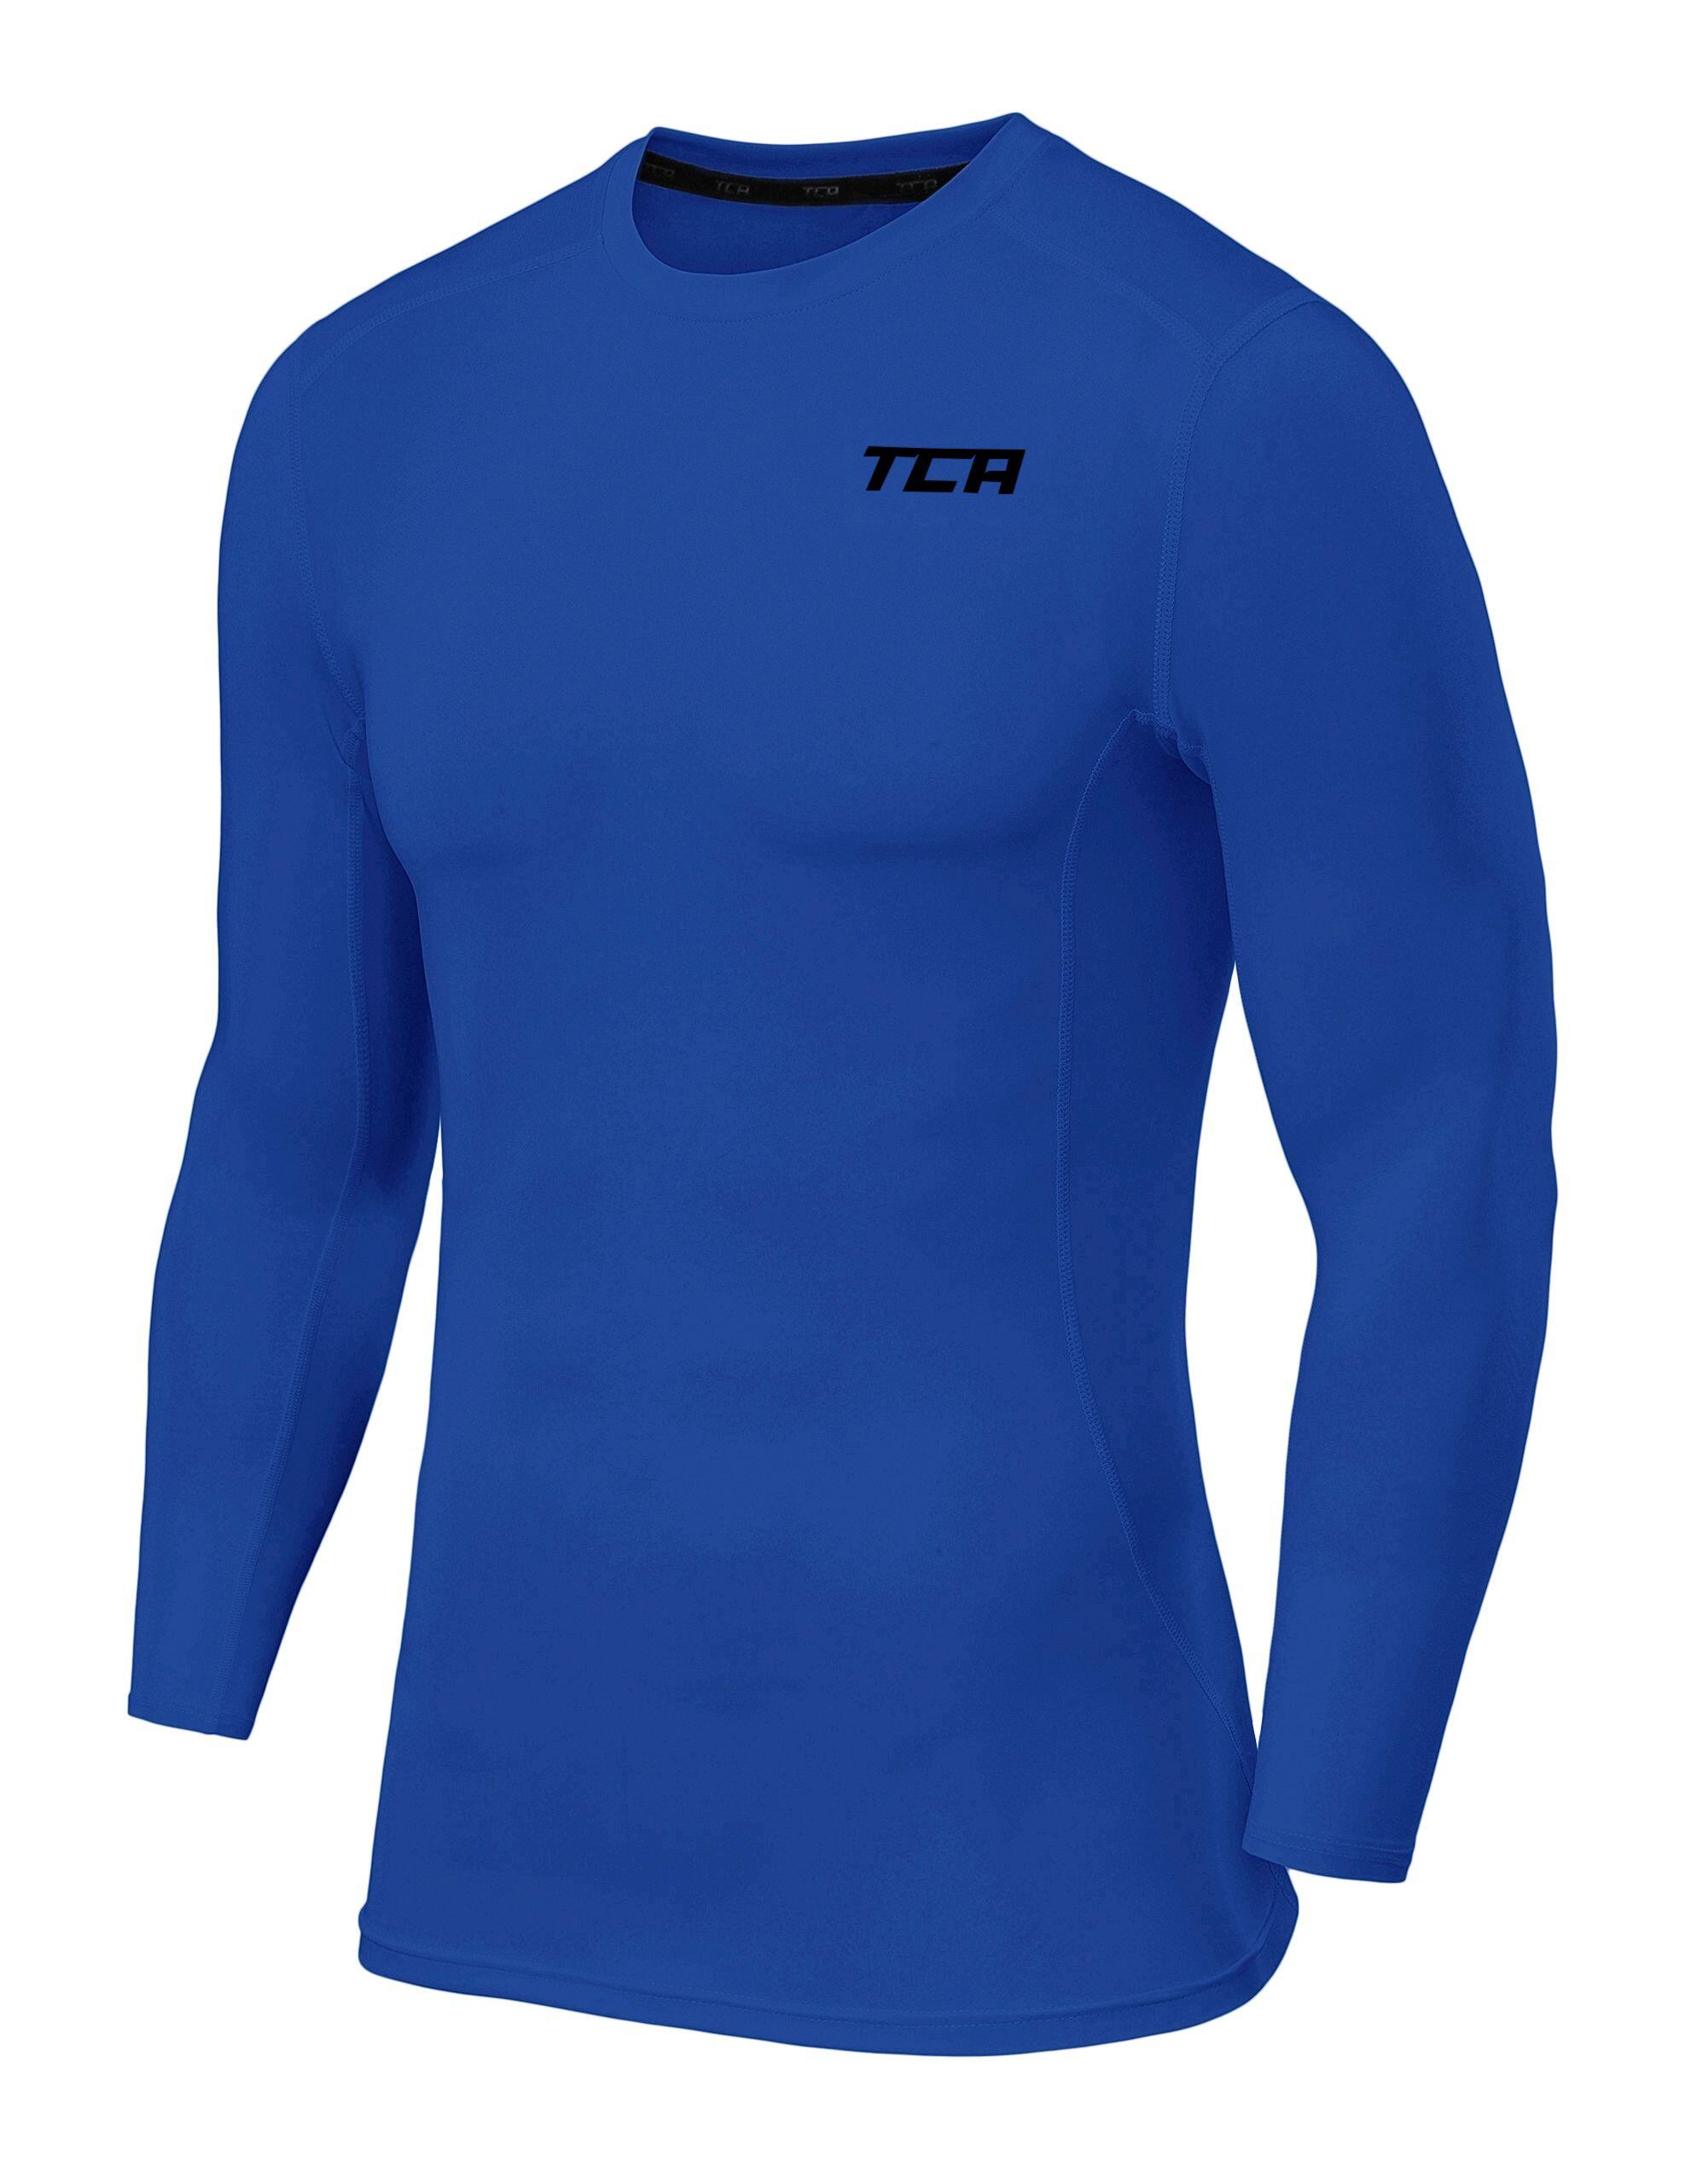 Men's Power Base Layer Compression Long Sleeve Top - Dazzling Blue 2/5